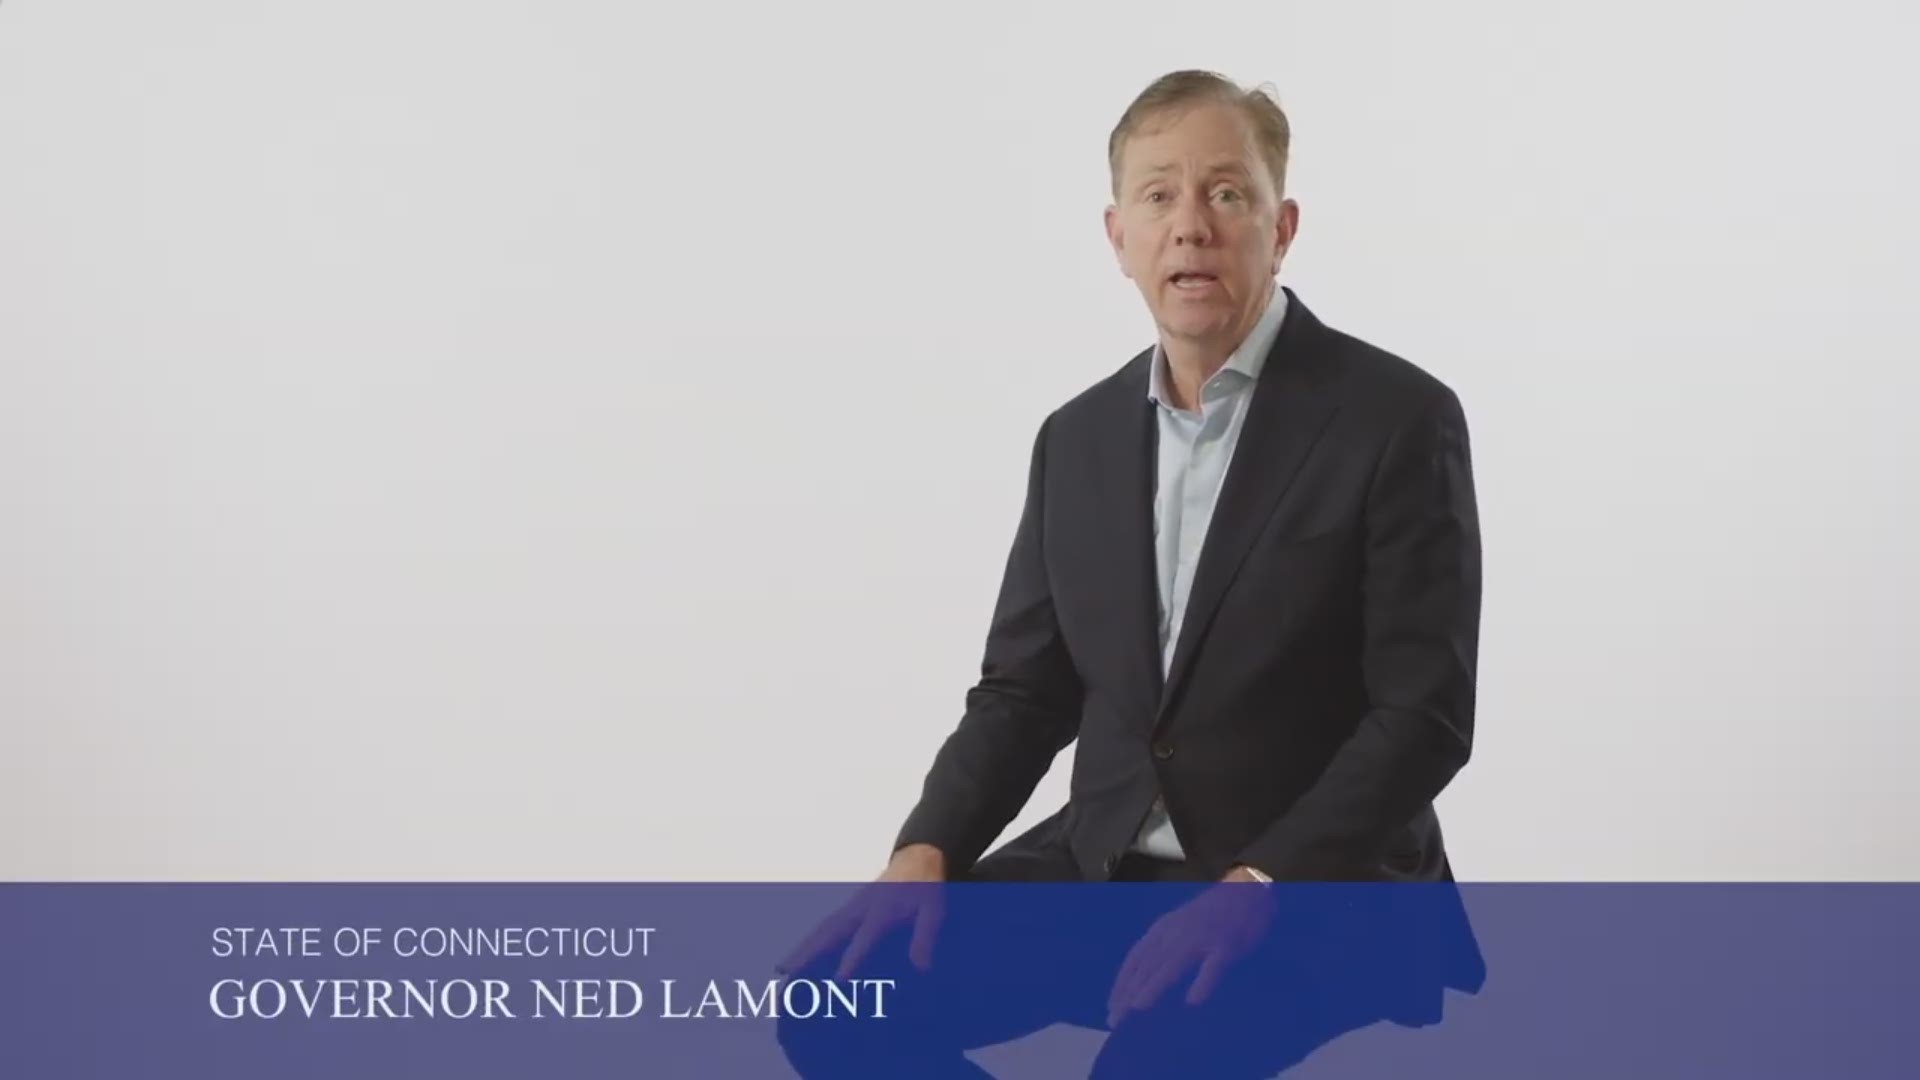 An important message for all of Connecticut from Governor Ned Lamont. April is the "opposite" month. We'll beat this virus by sticking together and the rules.